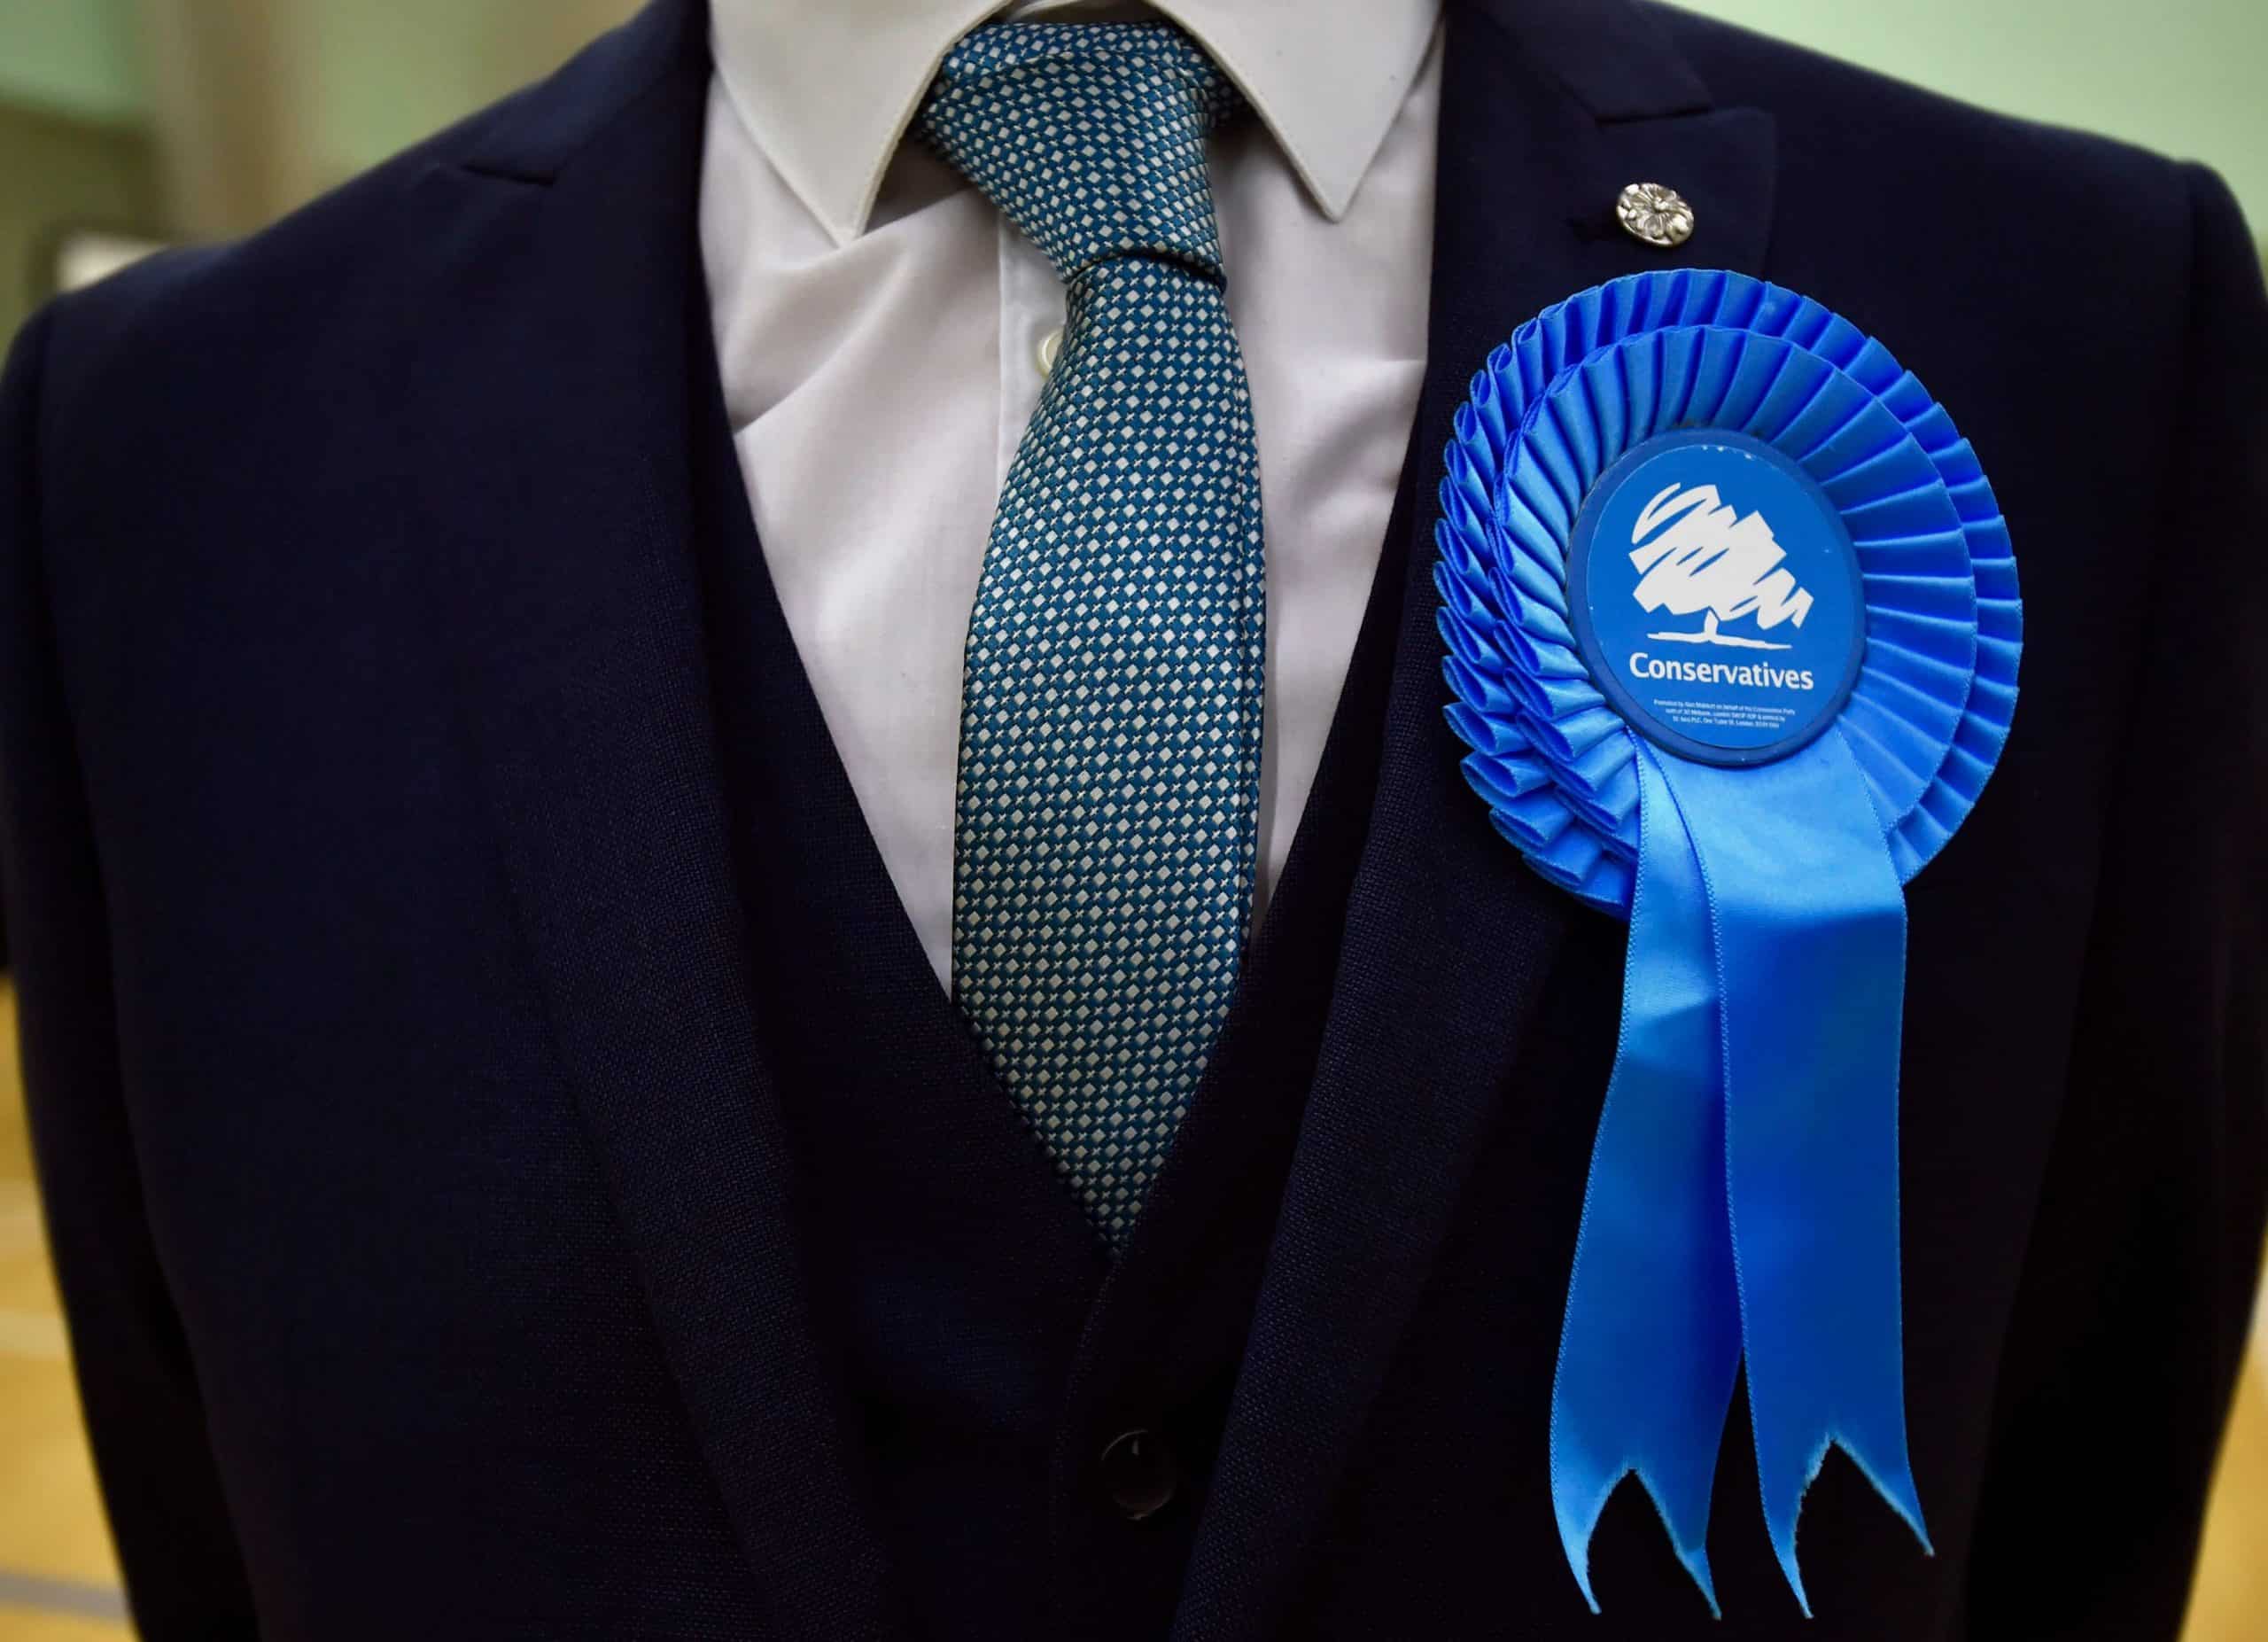 Tories told to investigate local branch after string of antisemitic messages